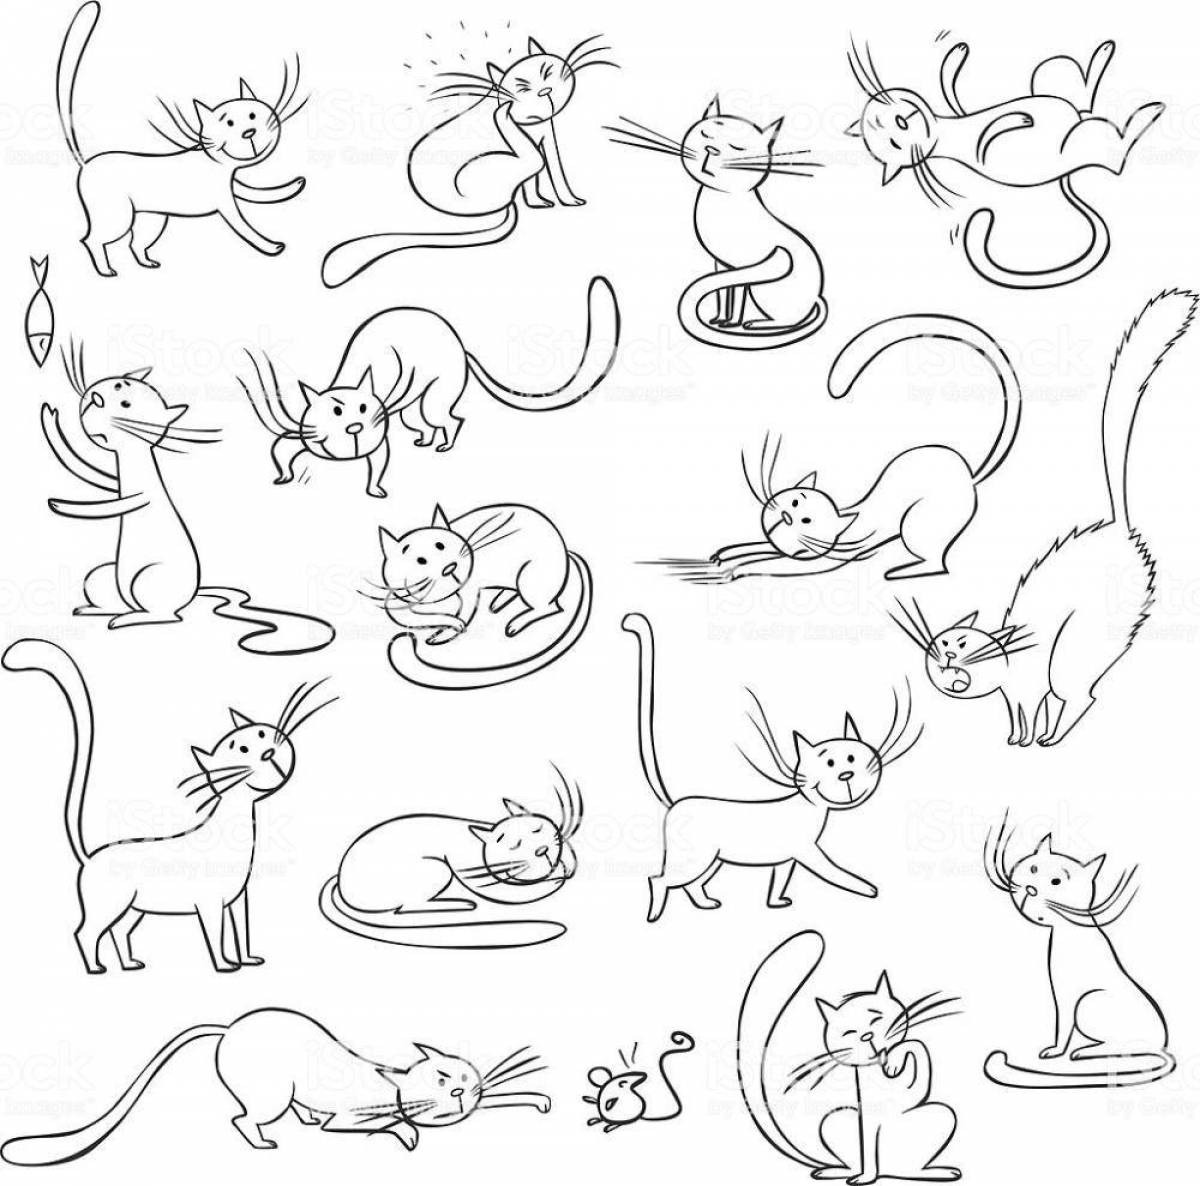 Ferocious cats coloring pages